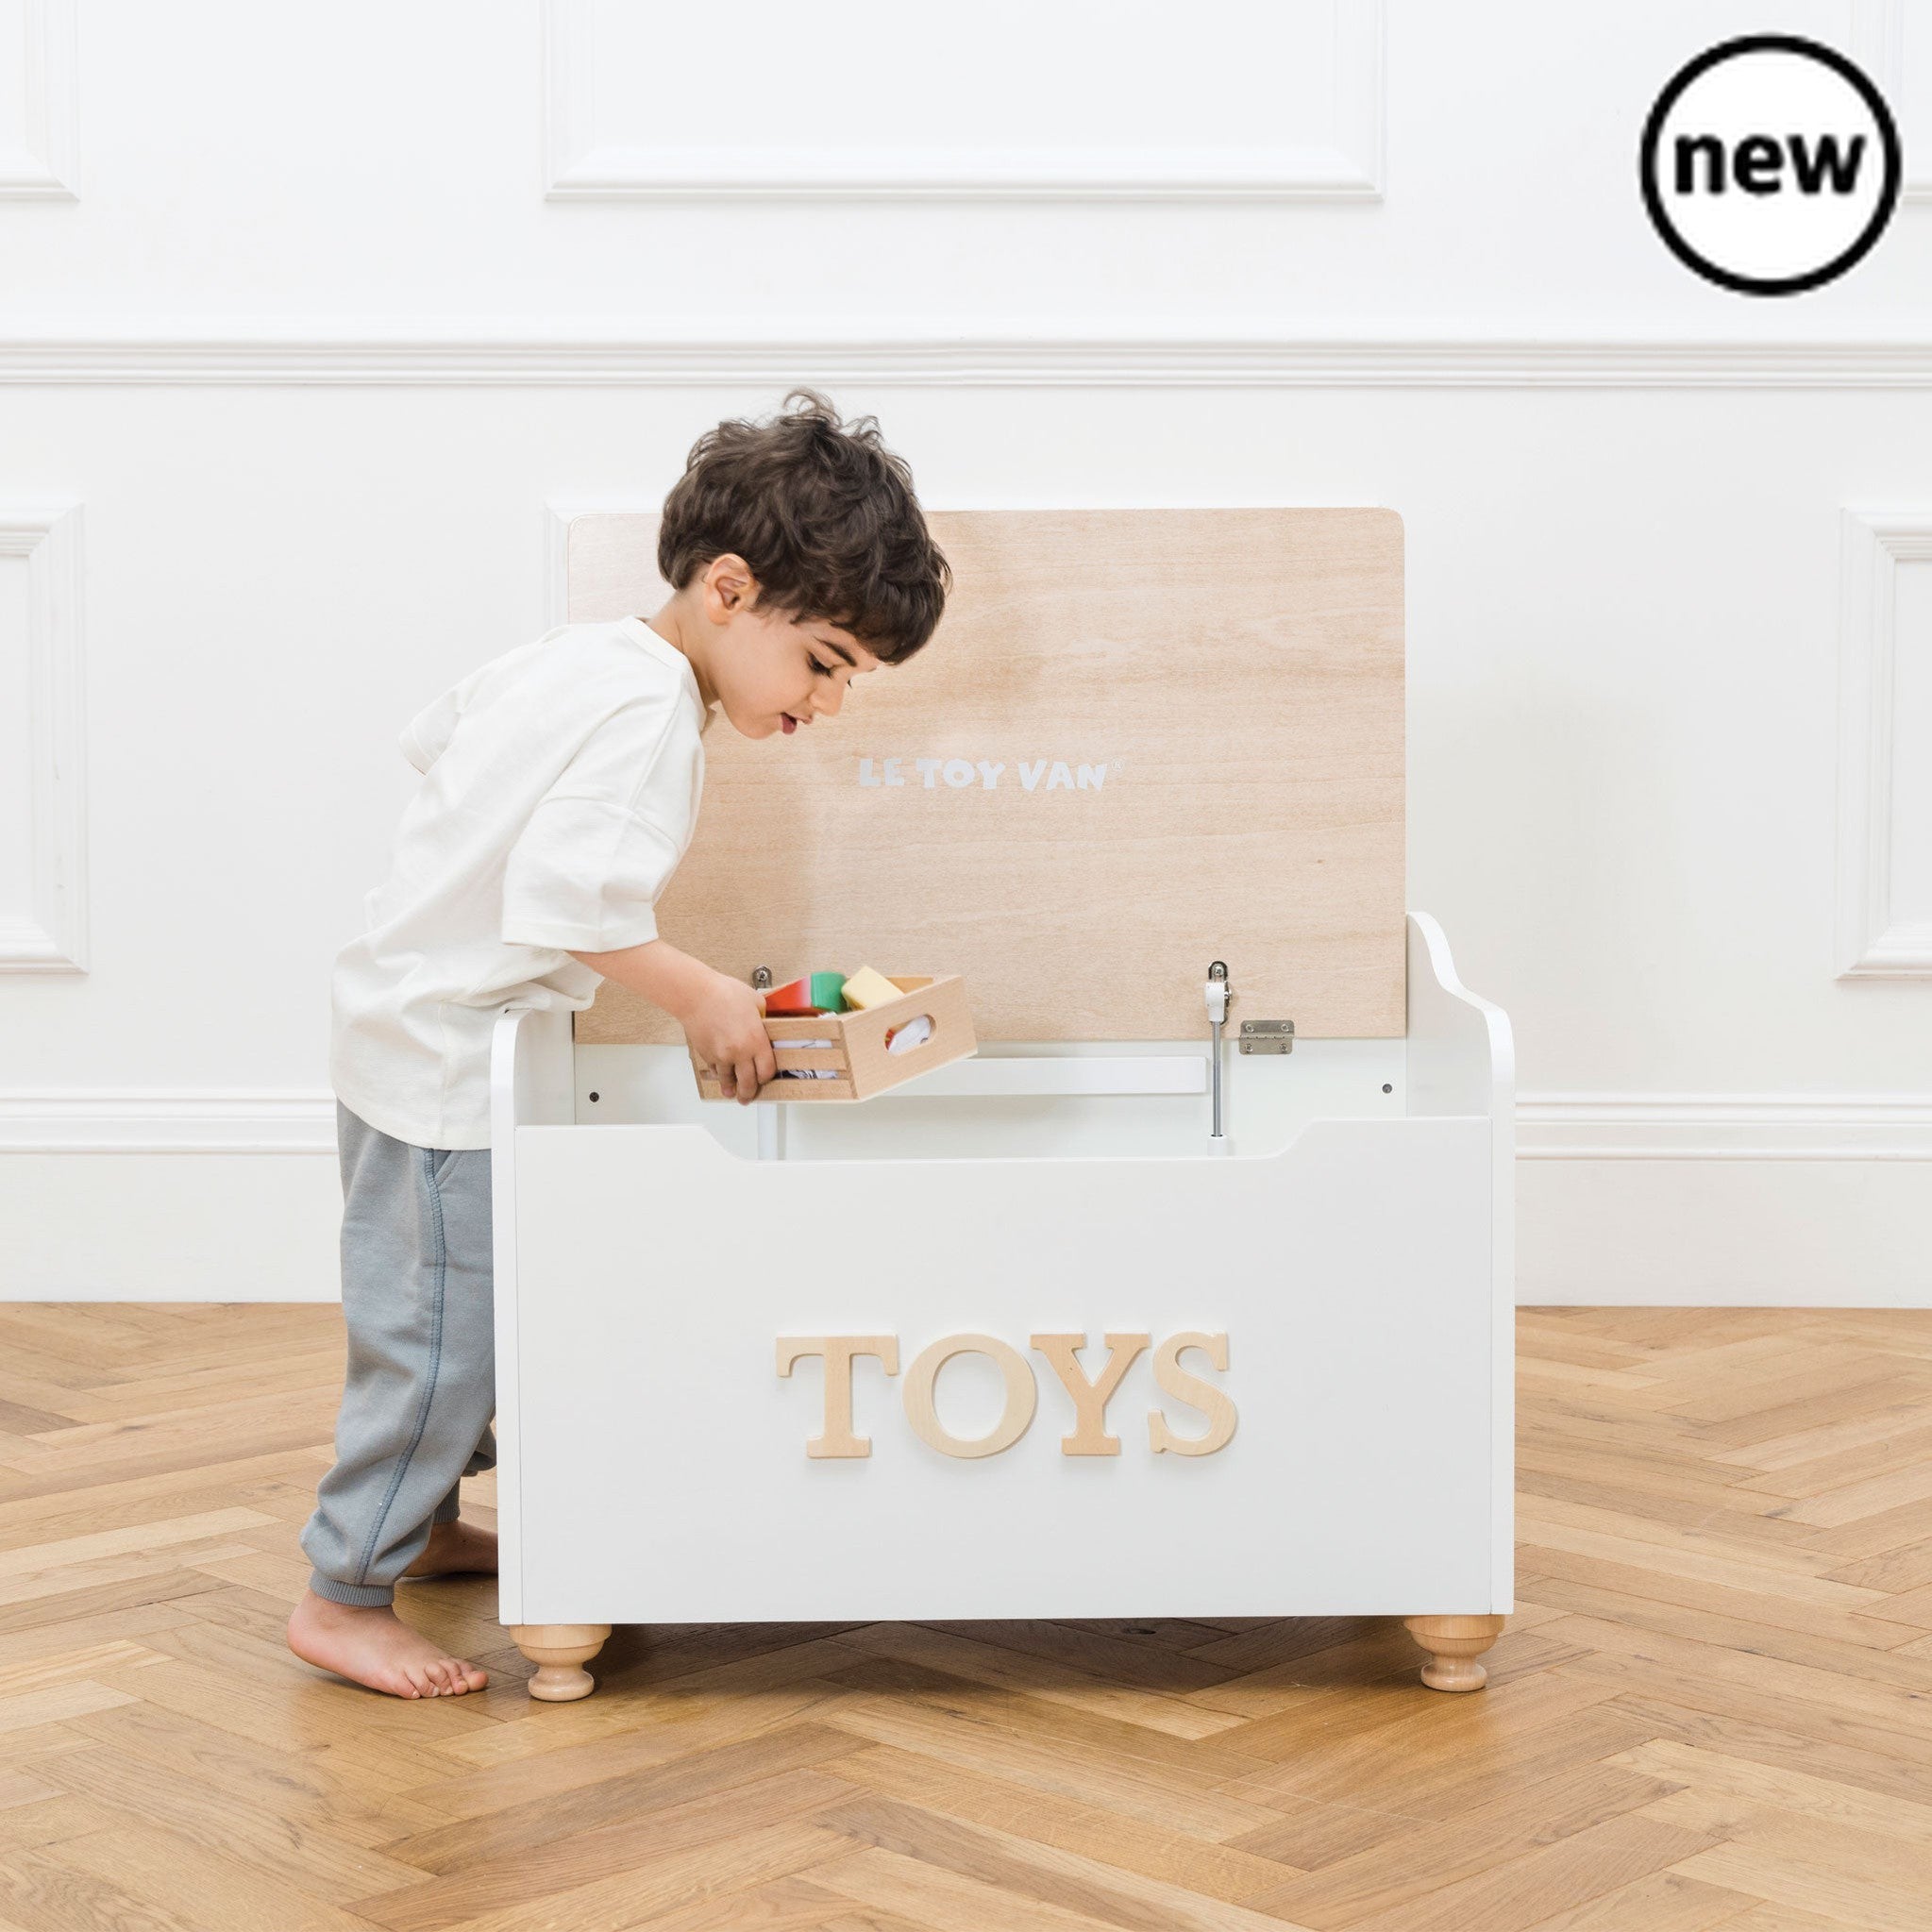 Toy Storage Box, Description This exquisitely hand-crafted wooden toy box is the perfect place for children to store their treasures and toy accessories. Keep the playroom or kids room tidy and stylish with this elegant storage box with lid which also doubles as a handy seat! With many appealing features including child safe soft closing hinges, turned wooden feet and embossed lettering, all finished in neutral classic white and natural wood finish. A wonderful furniture piece that will withstand the test o